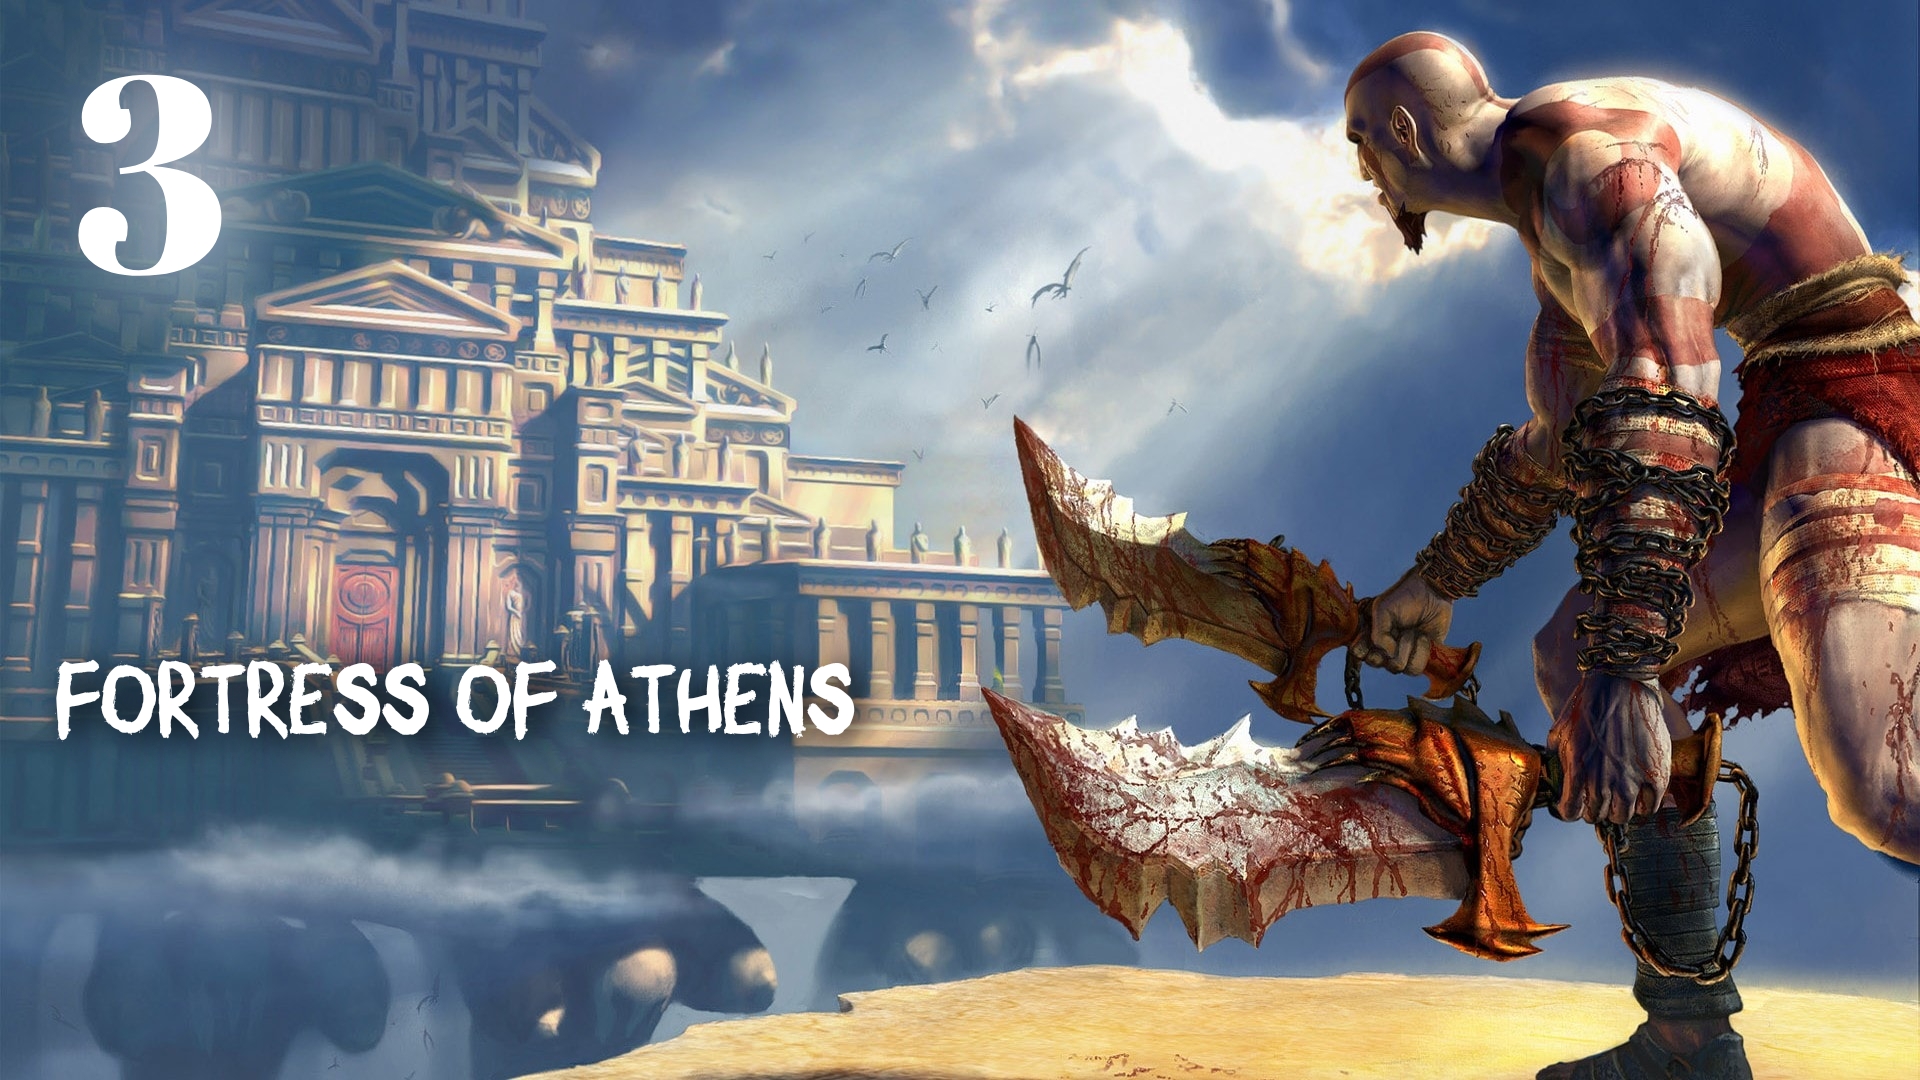 God of War HD The Gates of Athens: Fortress of Athens